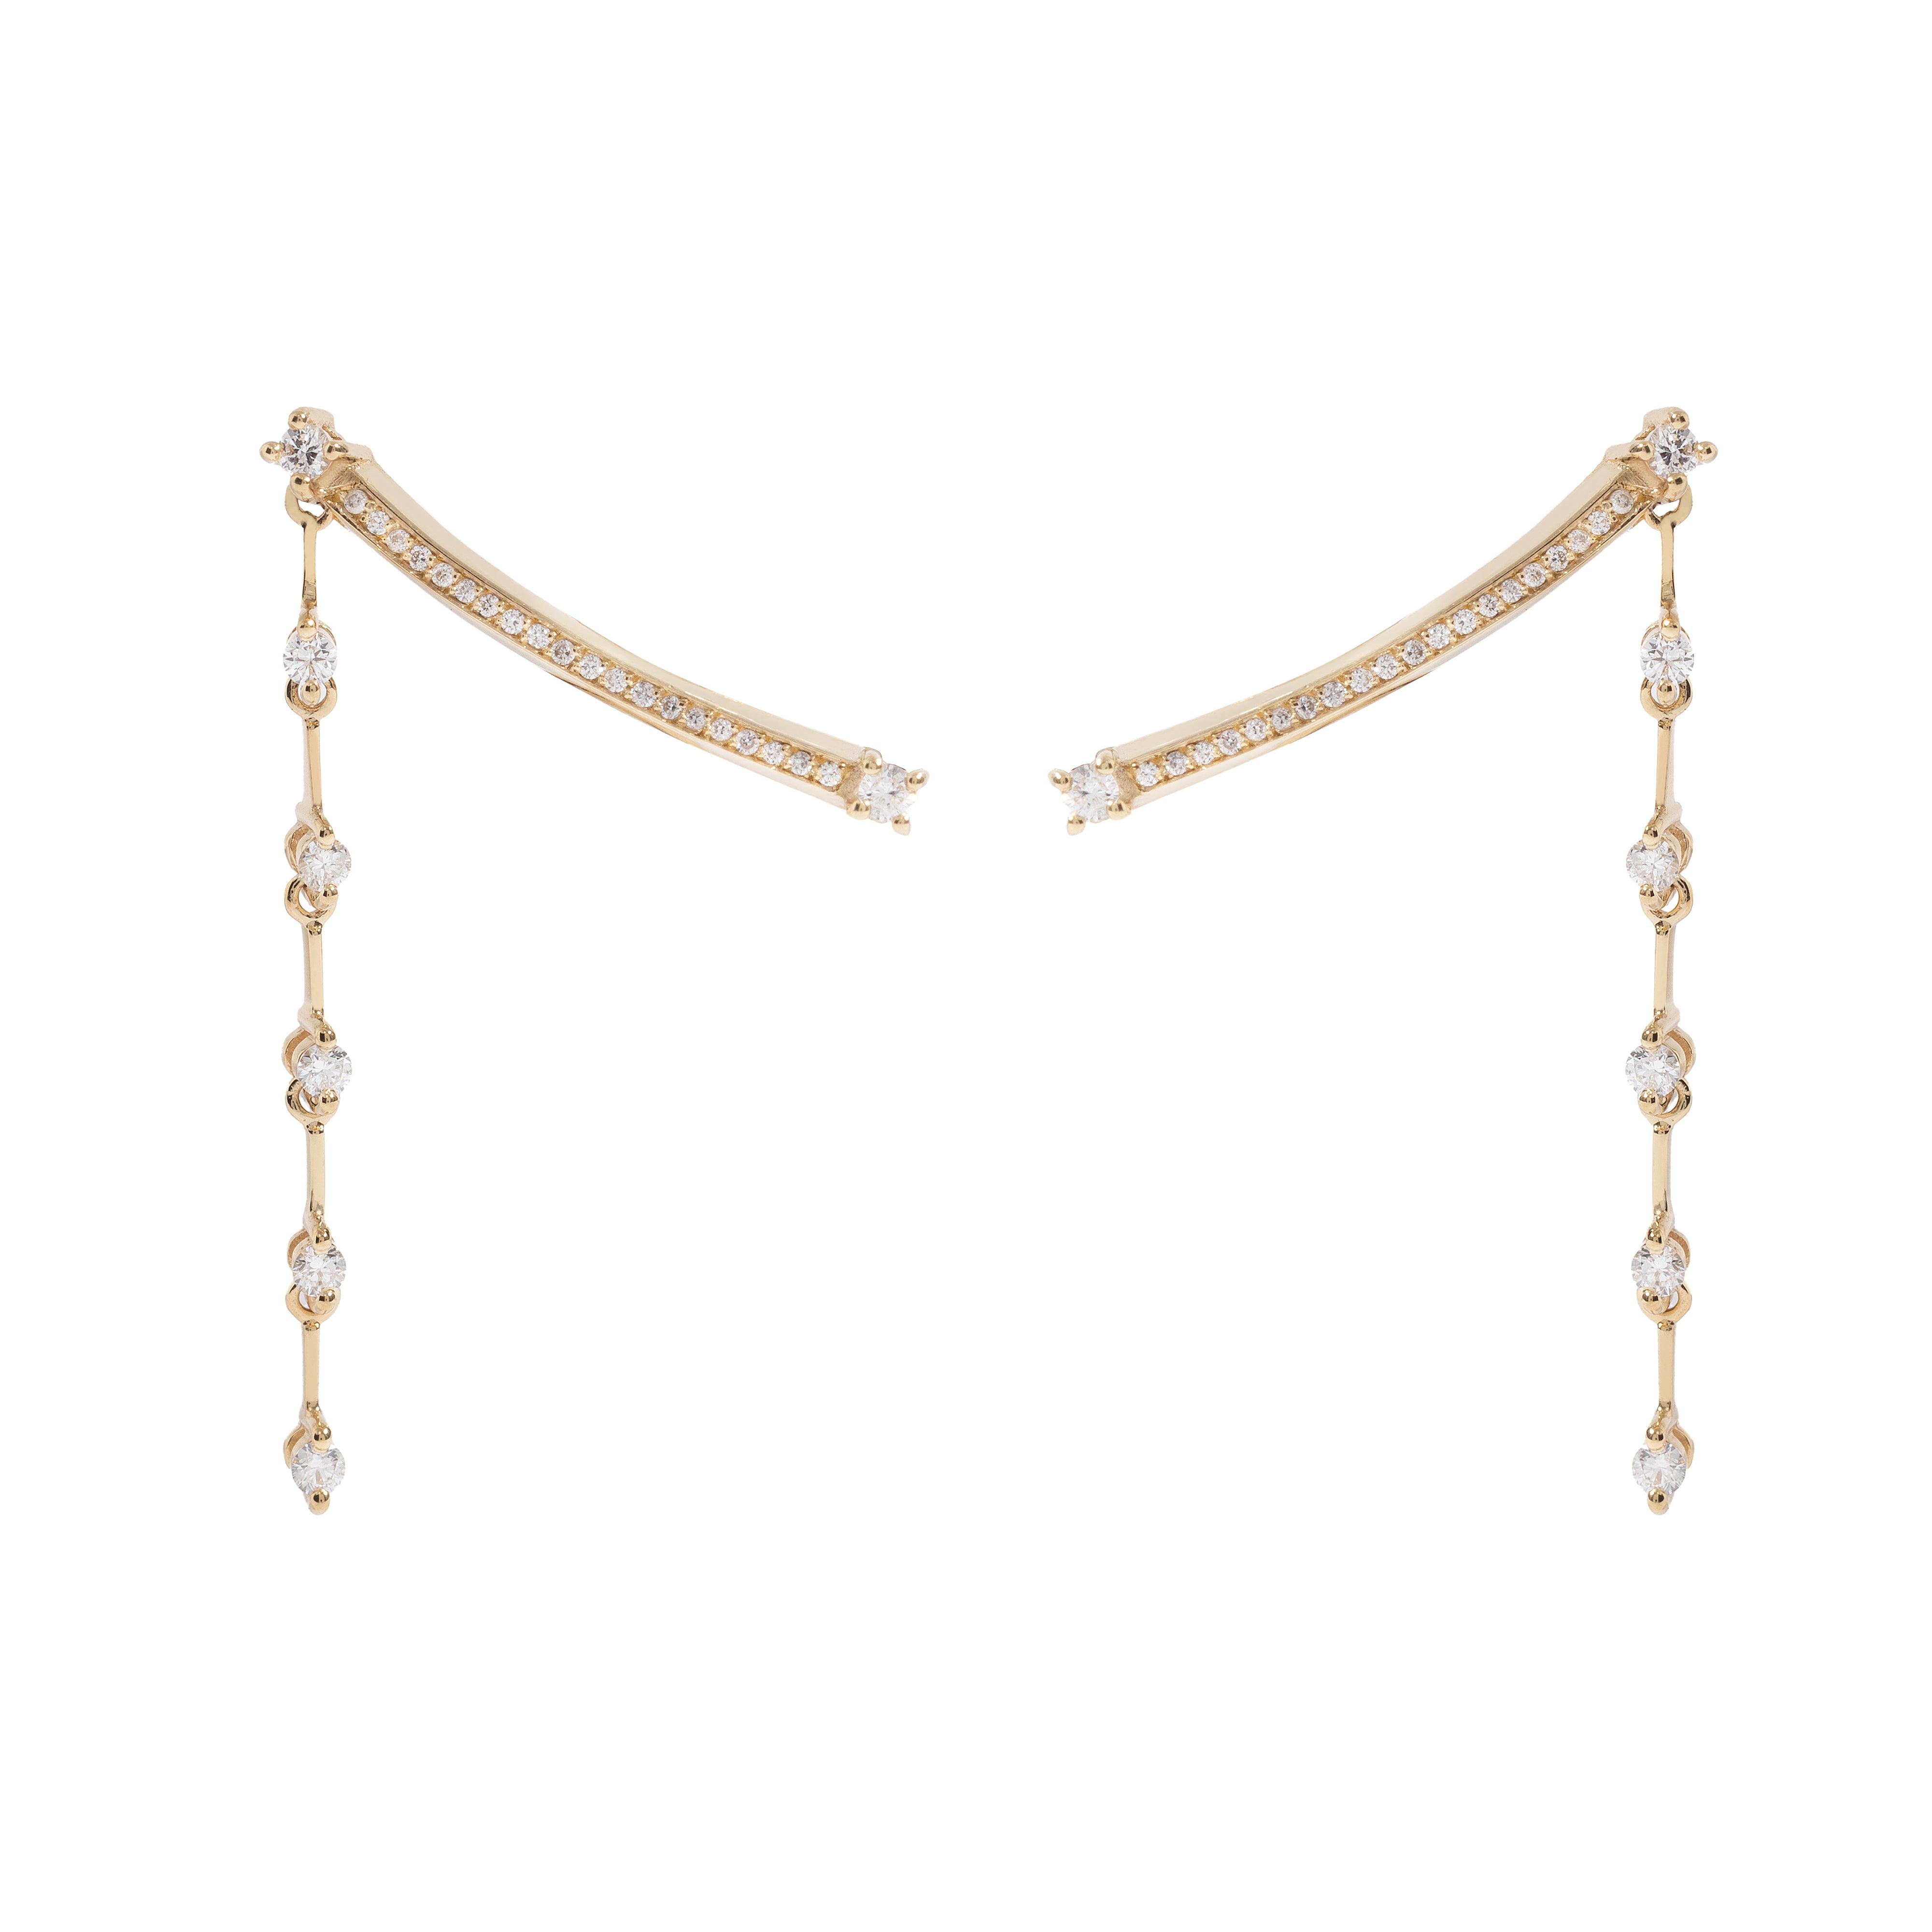 NEW VINTAGE EARRING IN 18K YELLOW GOLD WITH DIAMOND